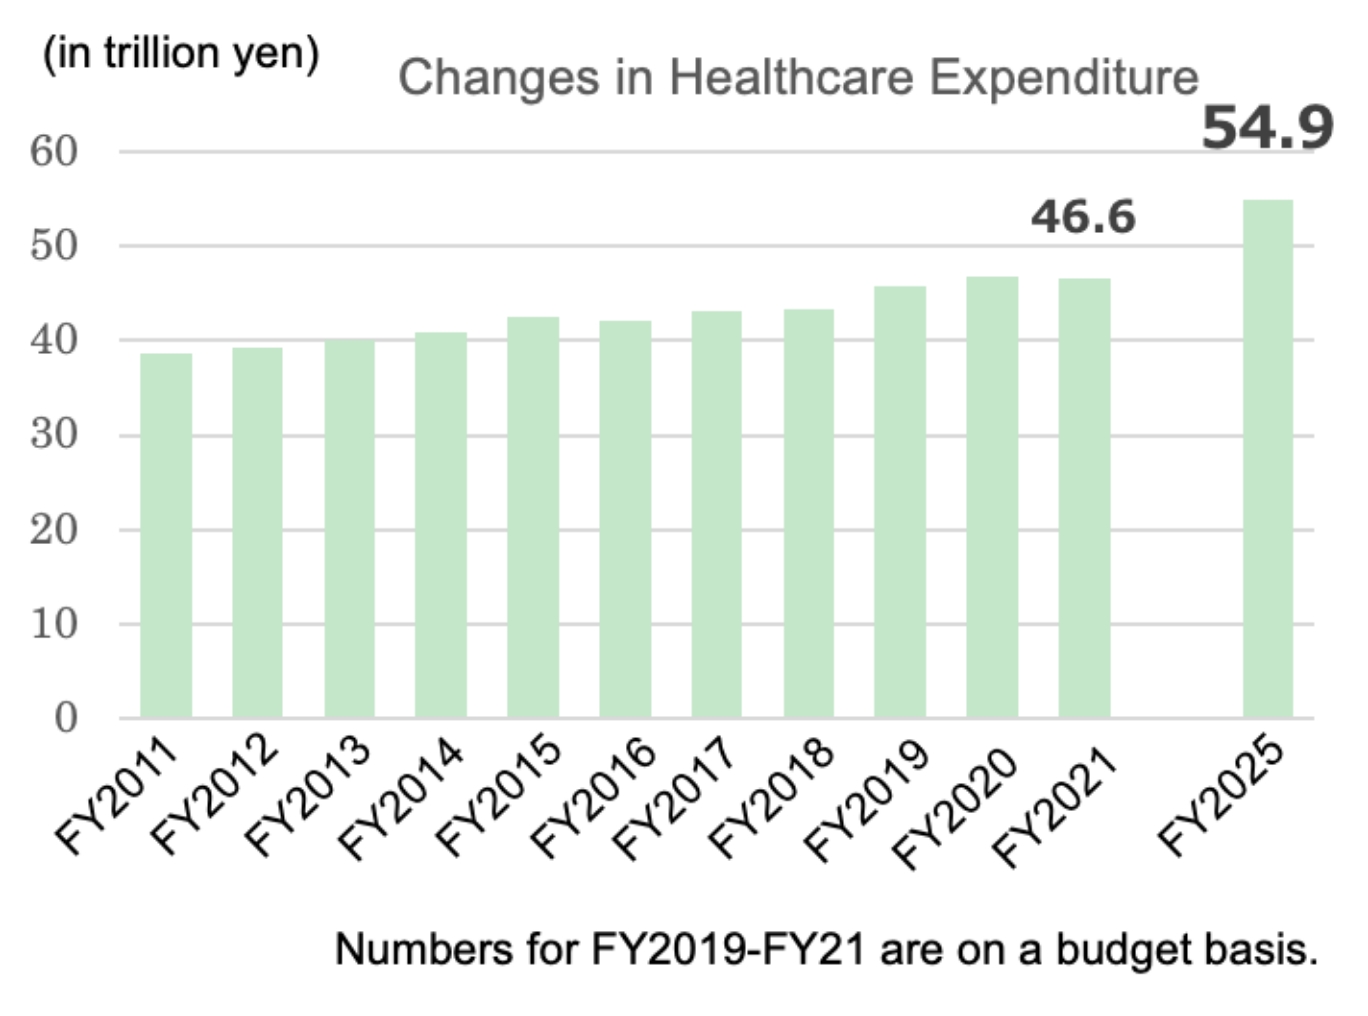 Changes in Healthcare Expenditure
                  